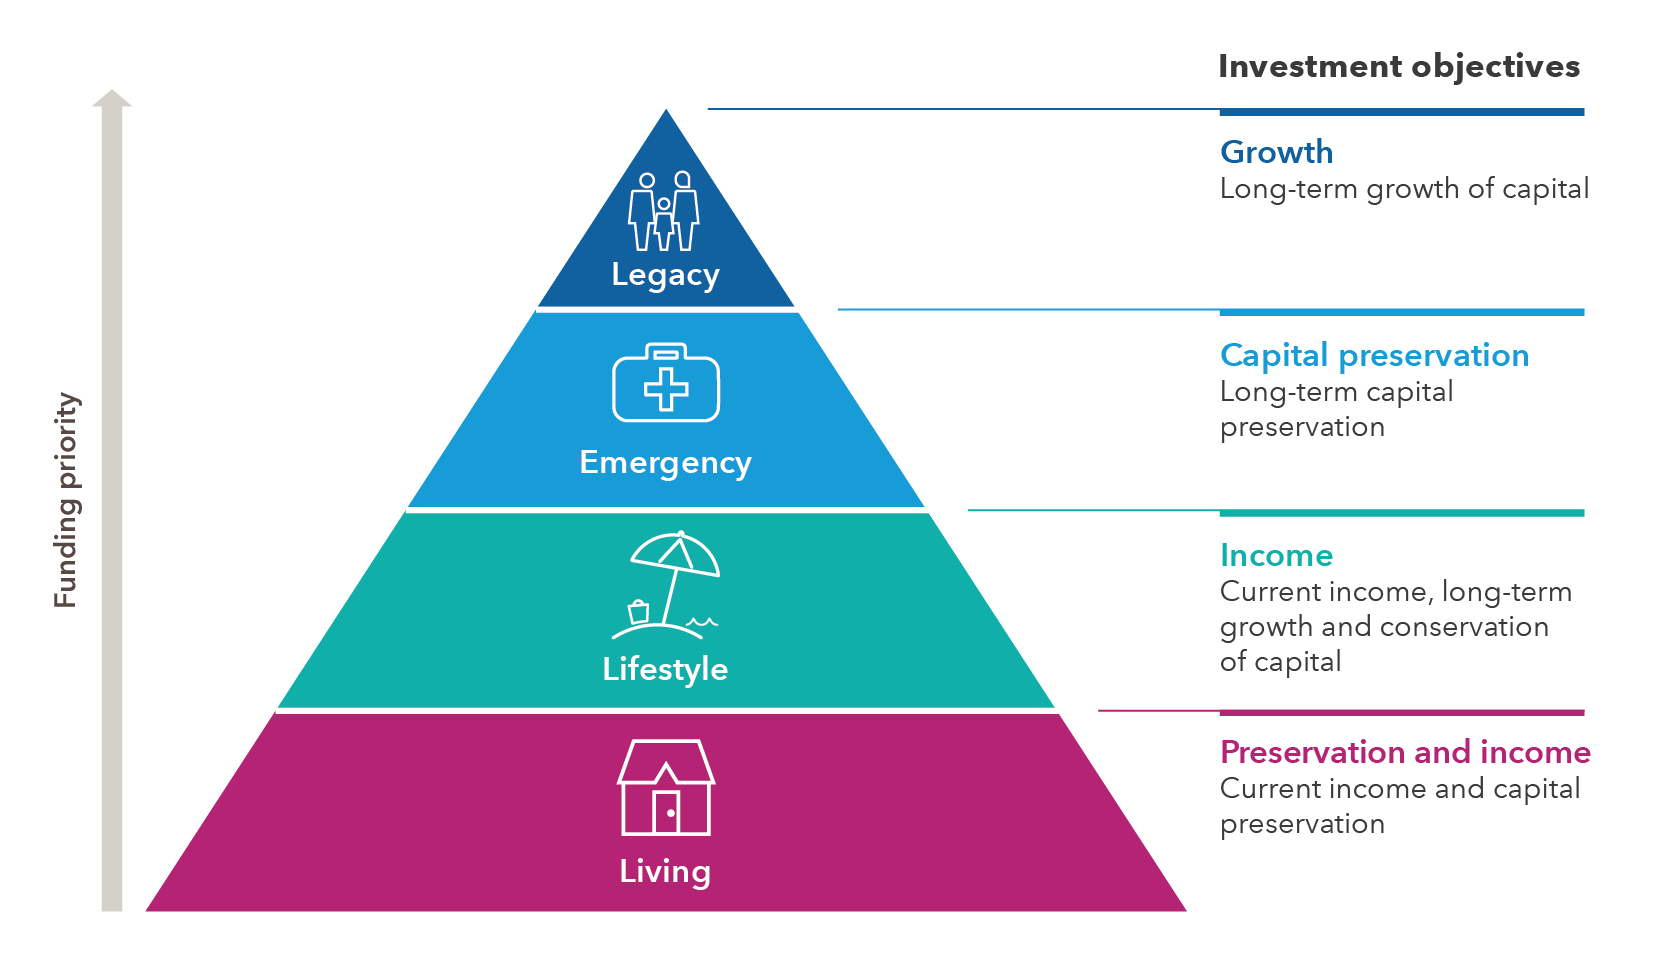 A pyramid displays four tiers of funding priorities for retirees, each with a corresponding investment objective. Going from largest to smallest, the tiers are: Living – Investment objective: Preservation and income. Current income and capital preservation. Lifestyle – Investment objective: Income. Current income, long-term growth and conservation of capital. Emergency – Investment objective: Capital preservation. Long-term capital preservation. Legacy – Investment objective: Growth. Long-term growth of capital.